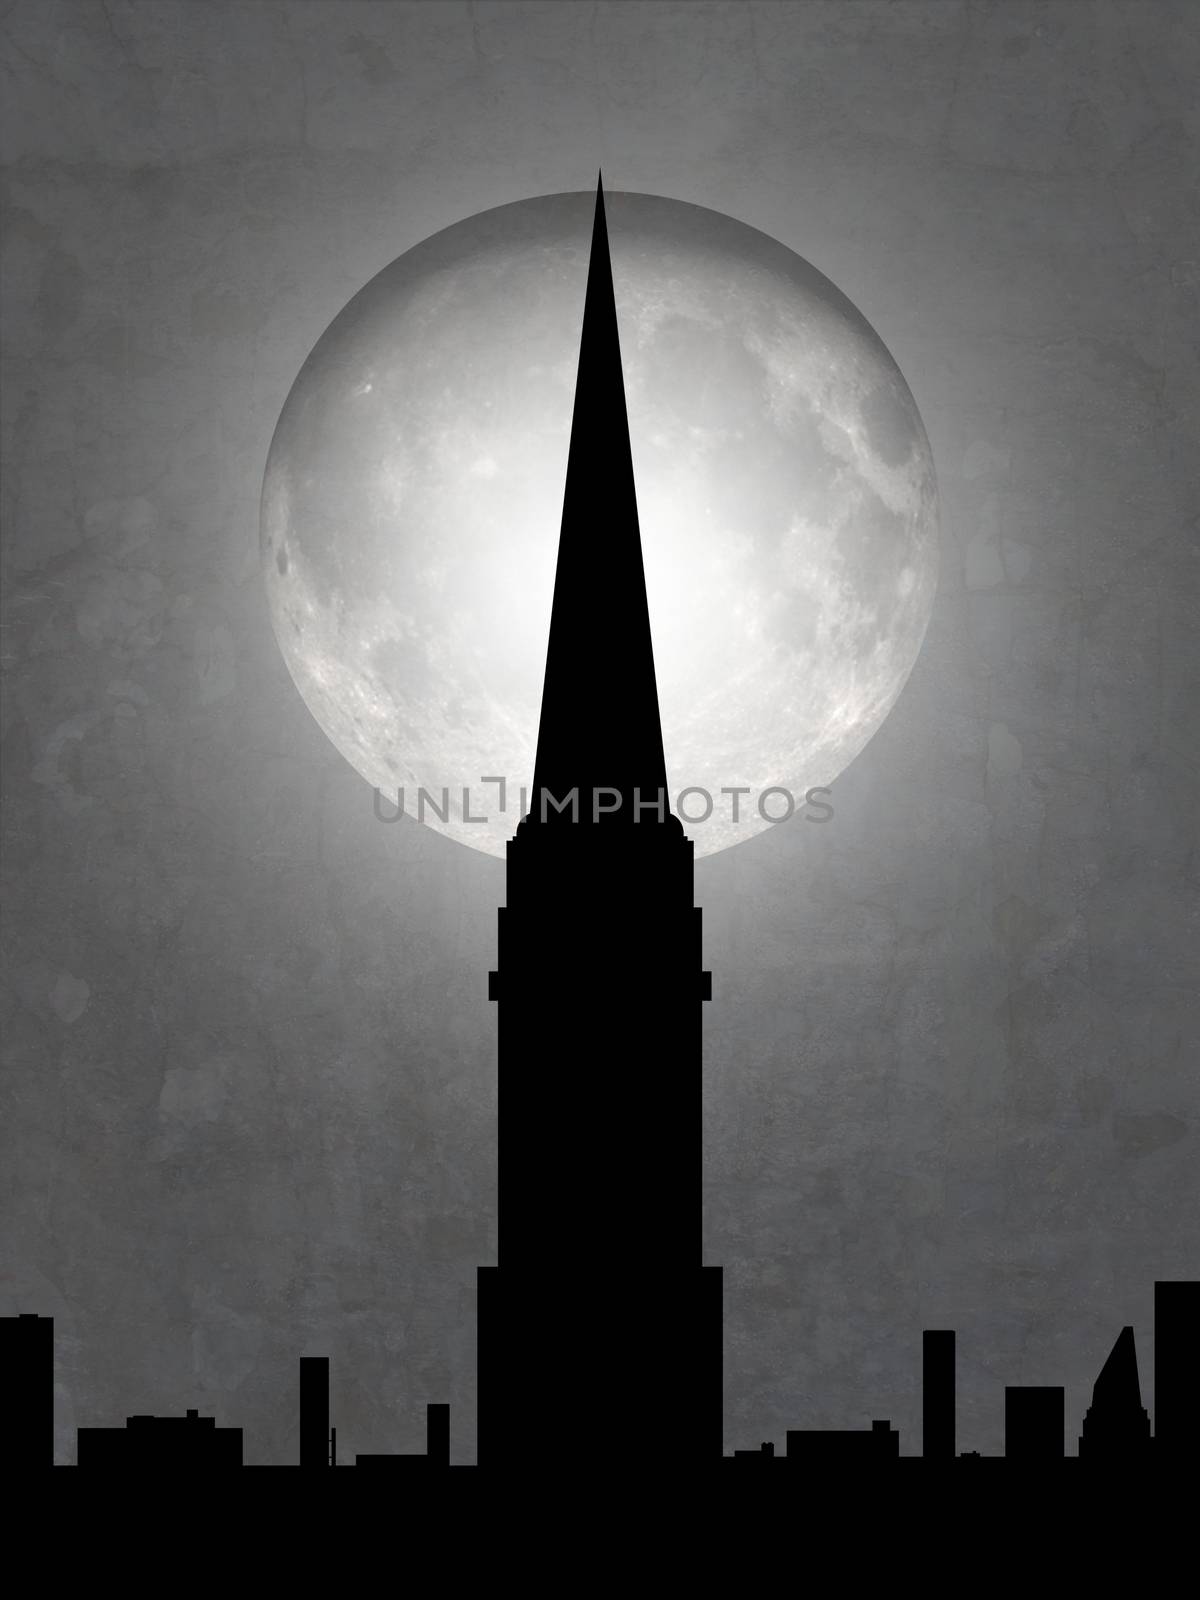 Illustration of a cityscape with tall tower and moon in the background